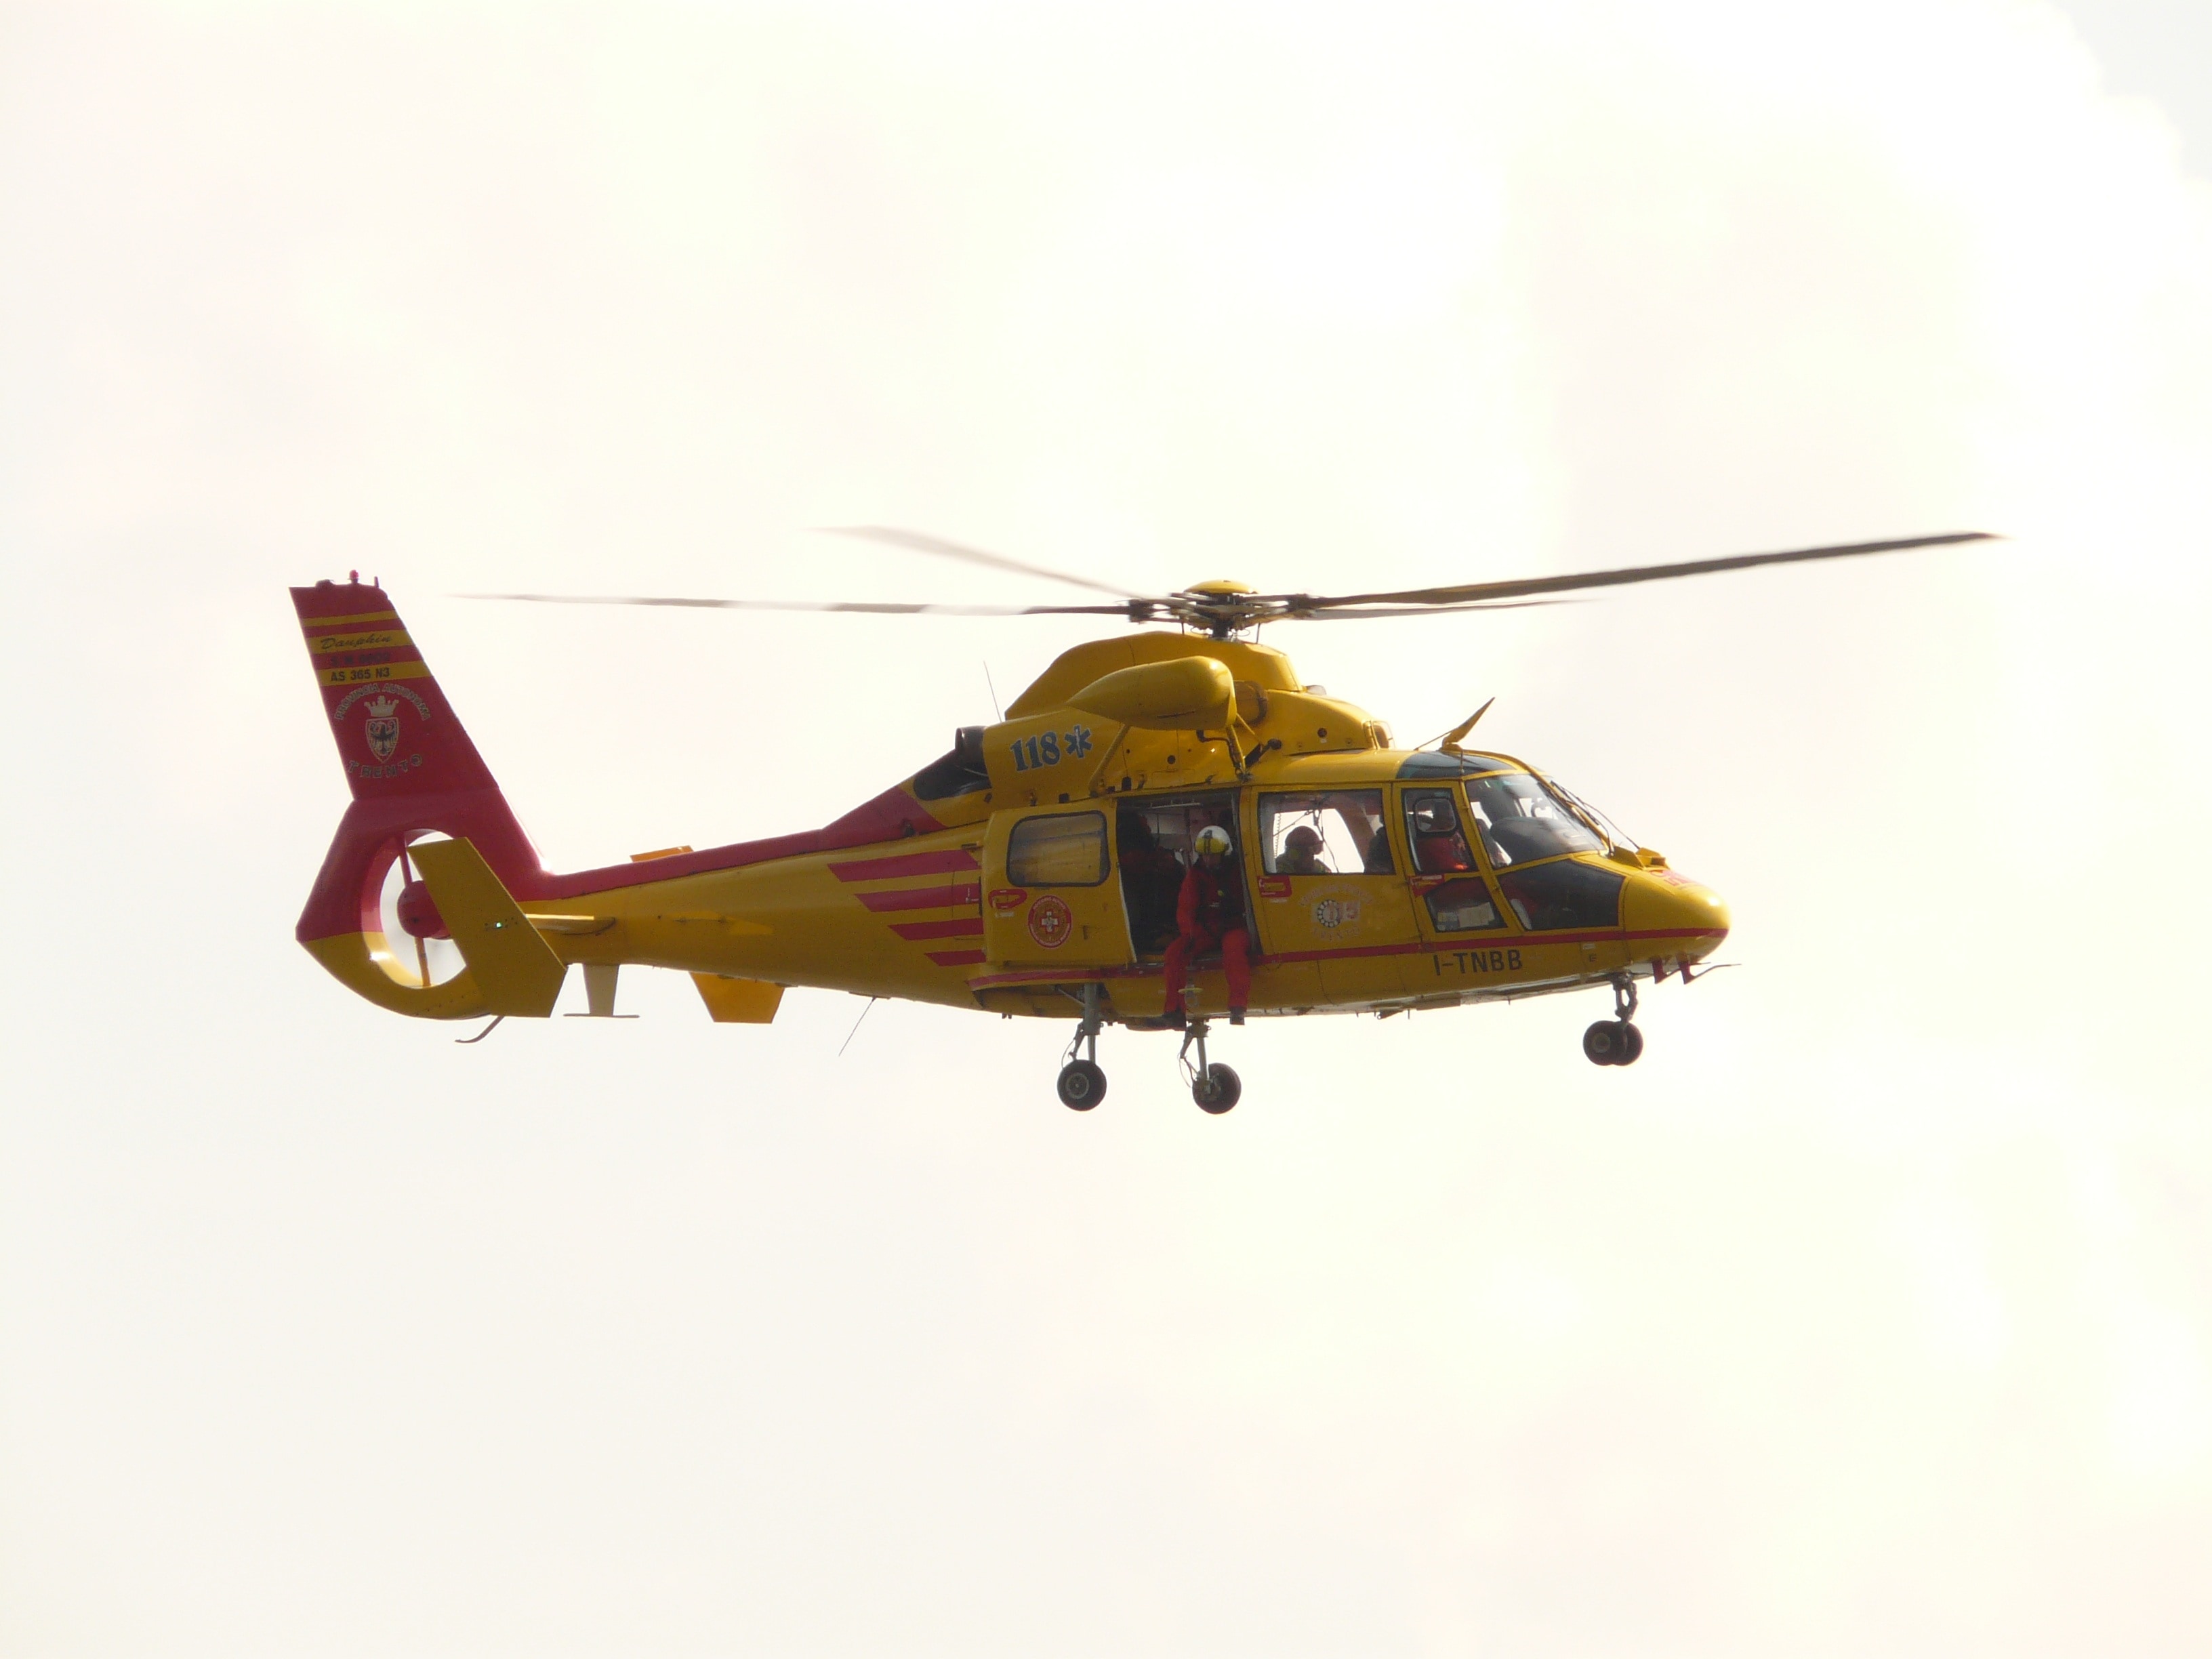 yellow rescue helicopter